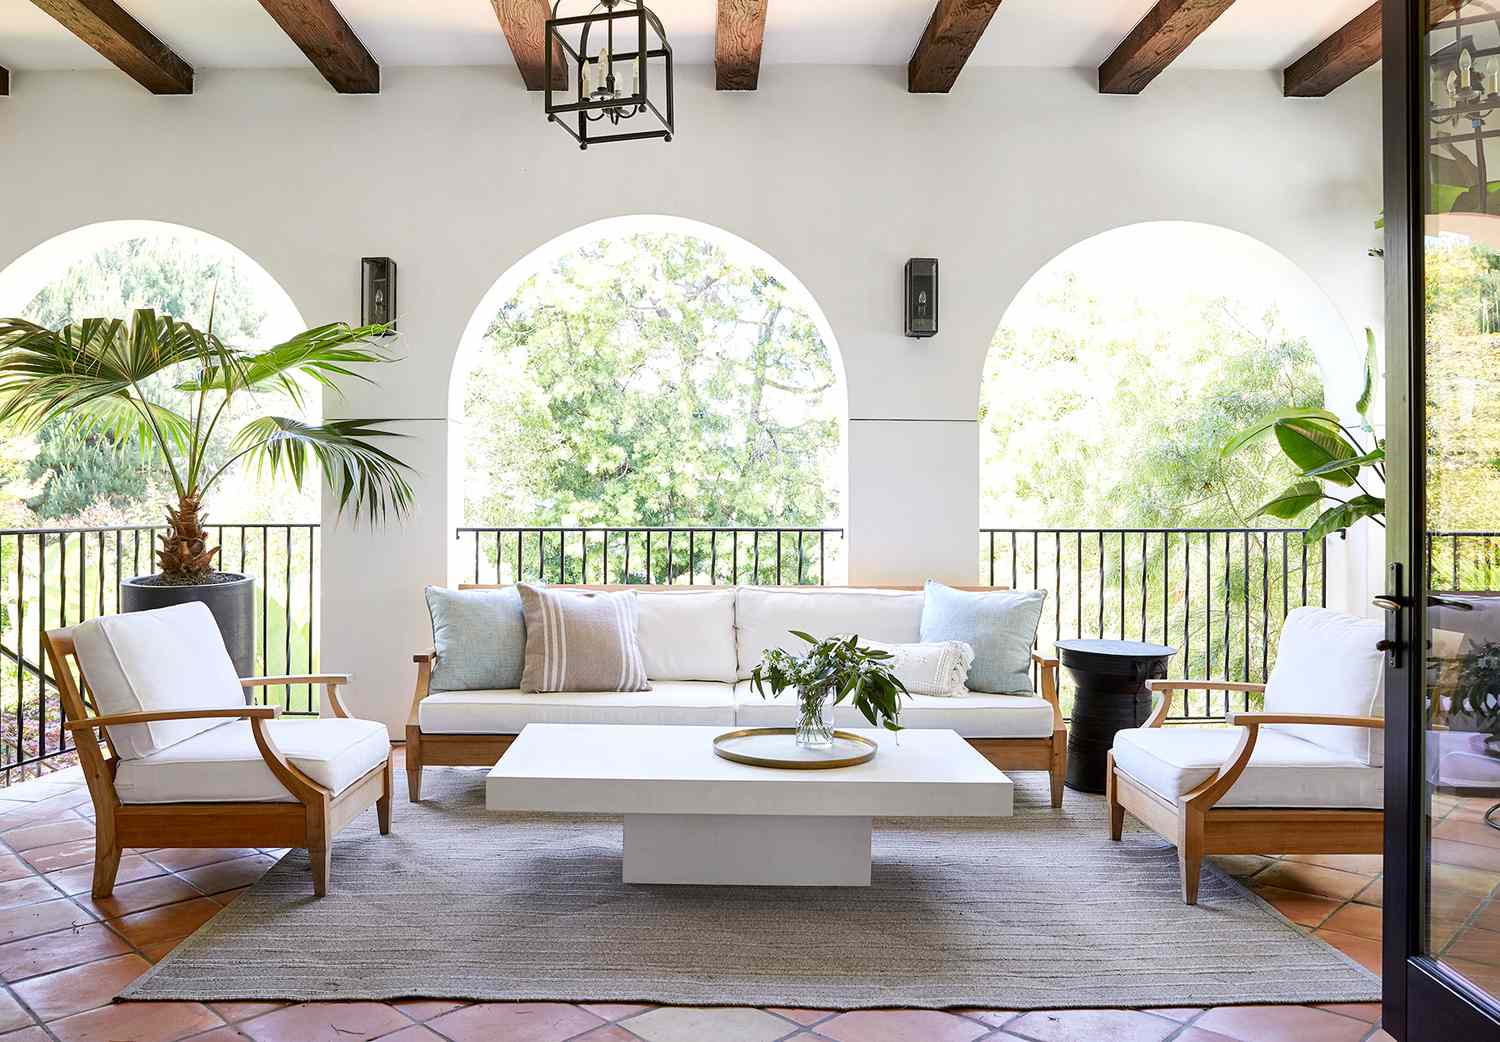 10 Beautiful Outdoor Spaces That Will Make You Rethink Your Current Backyard Martha Stewart